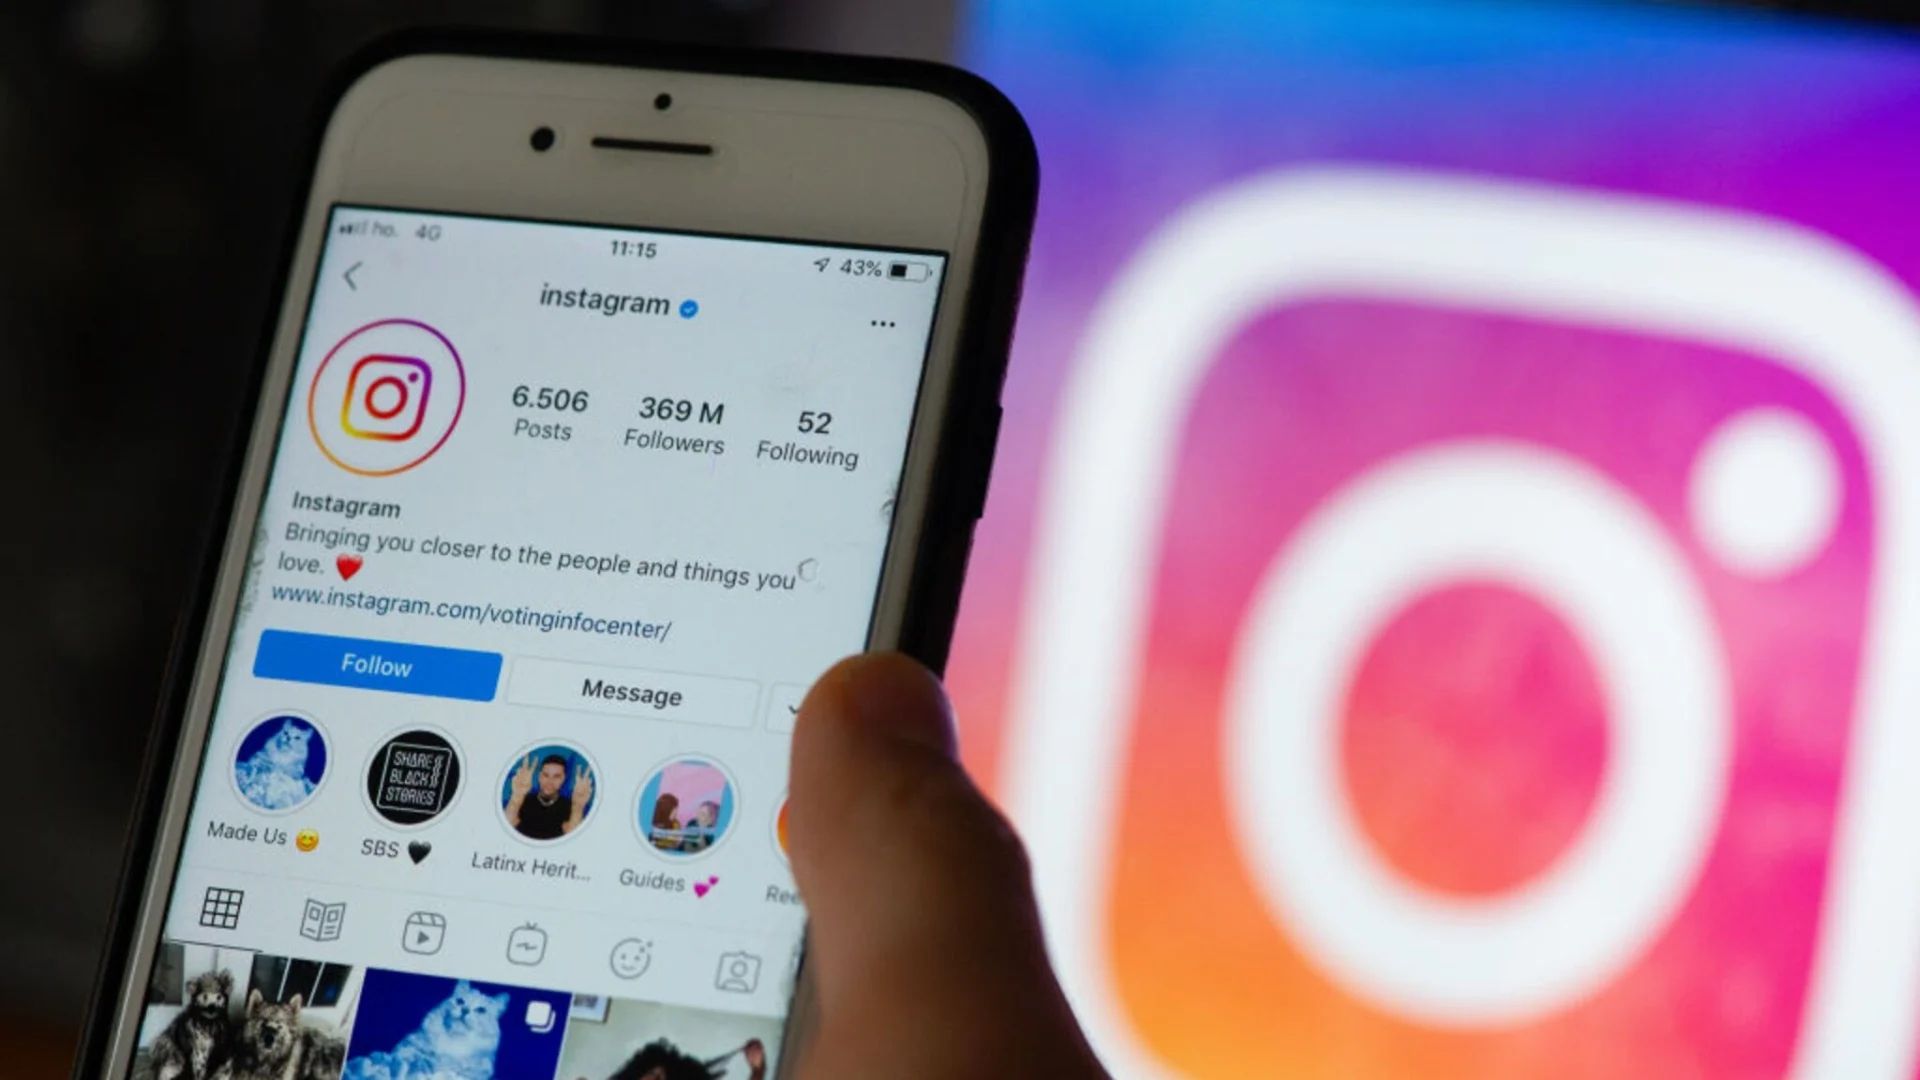 How to turn off notes on Instagram?